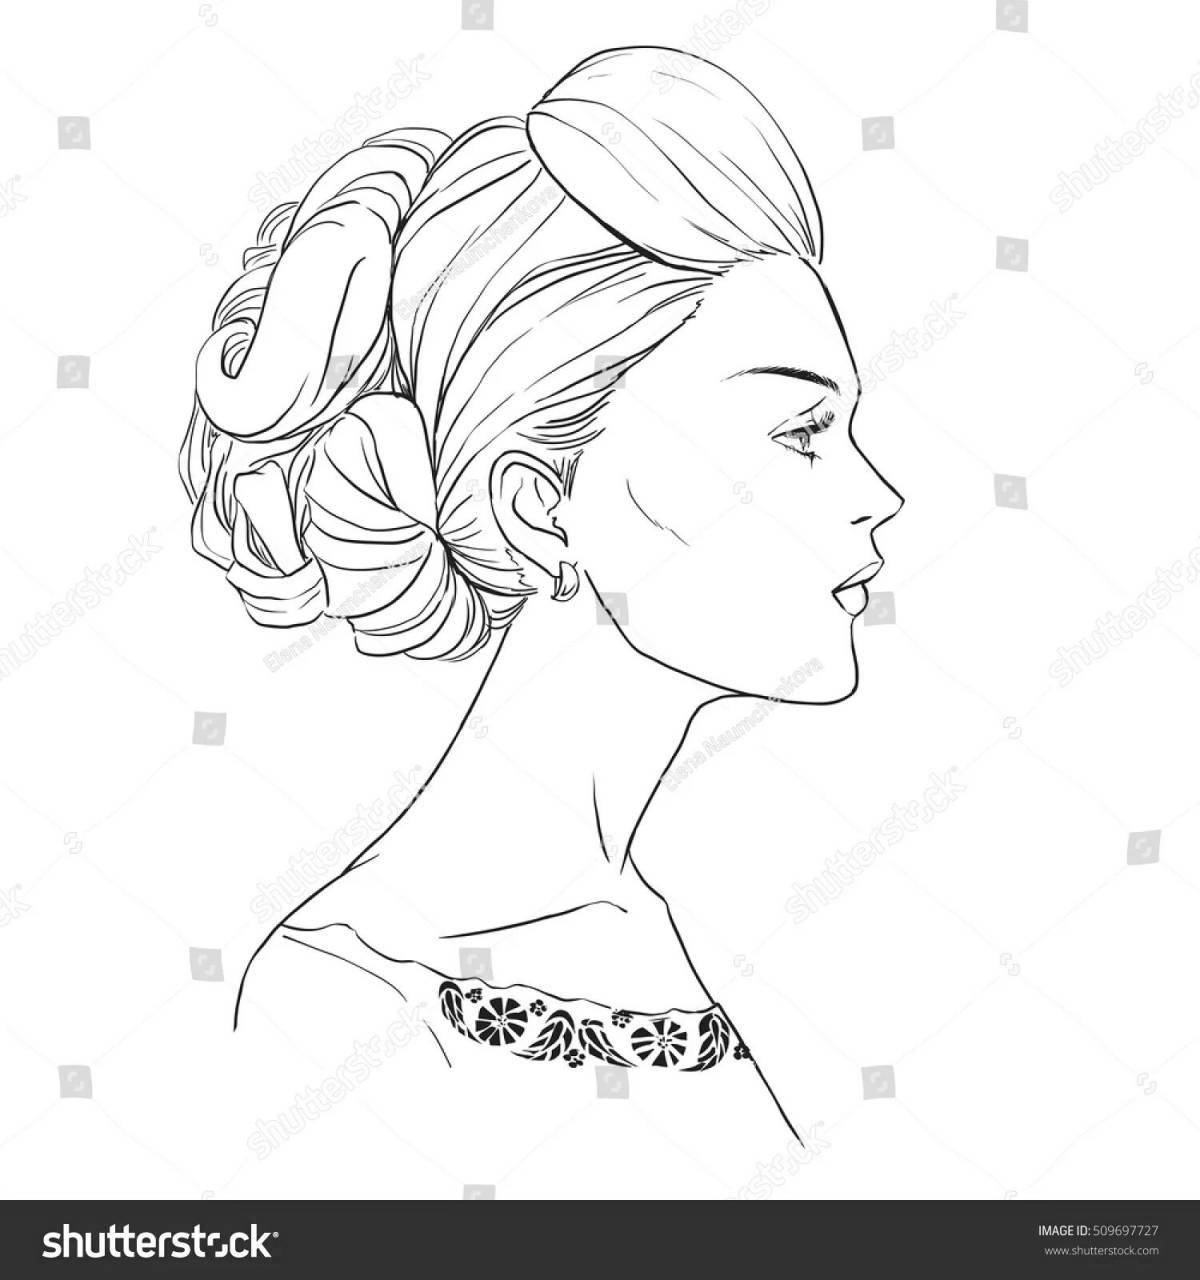 Coloring page of bright face profile